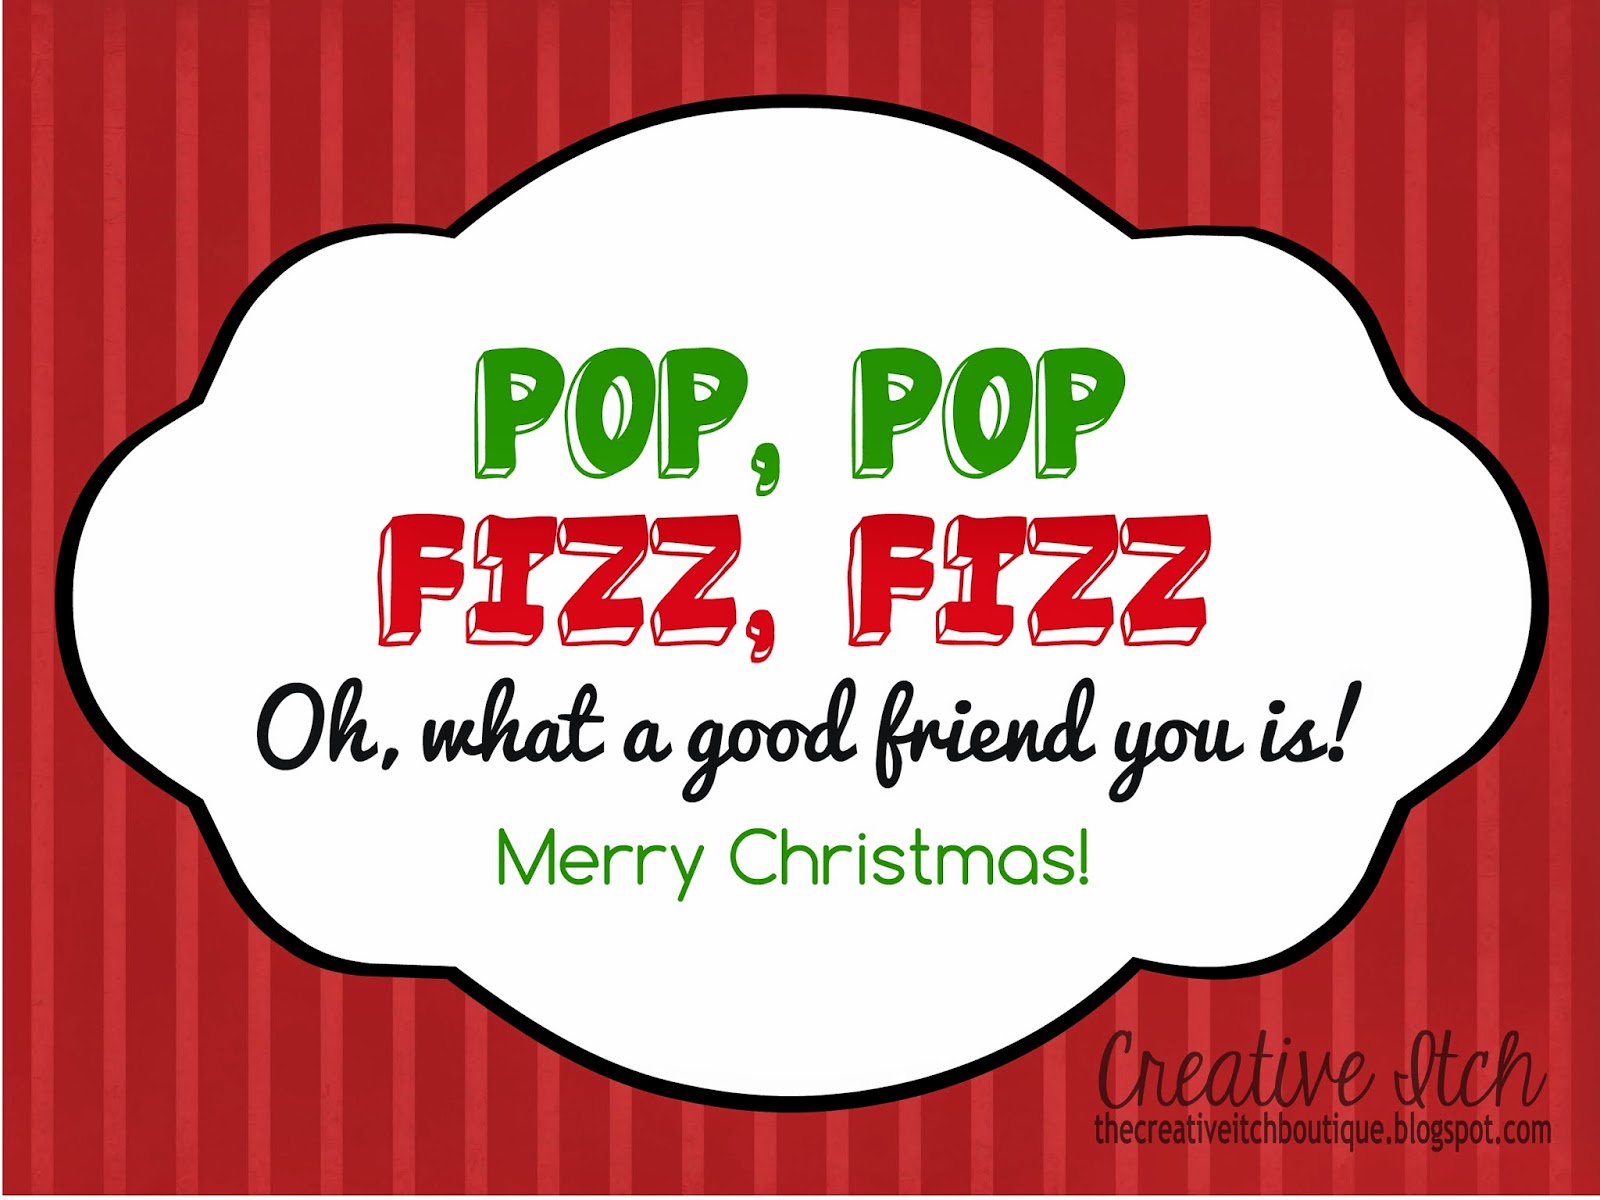 creative-itch-easy-christmas-gift-idea-with-free-printable